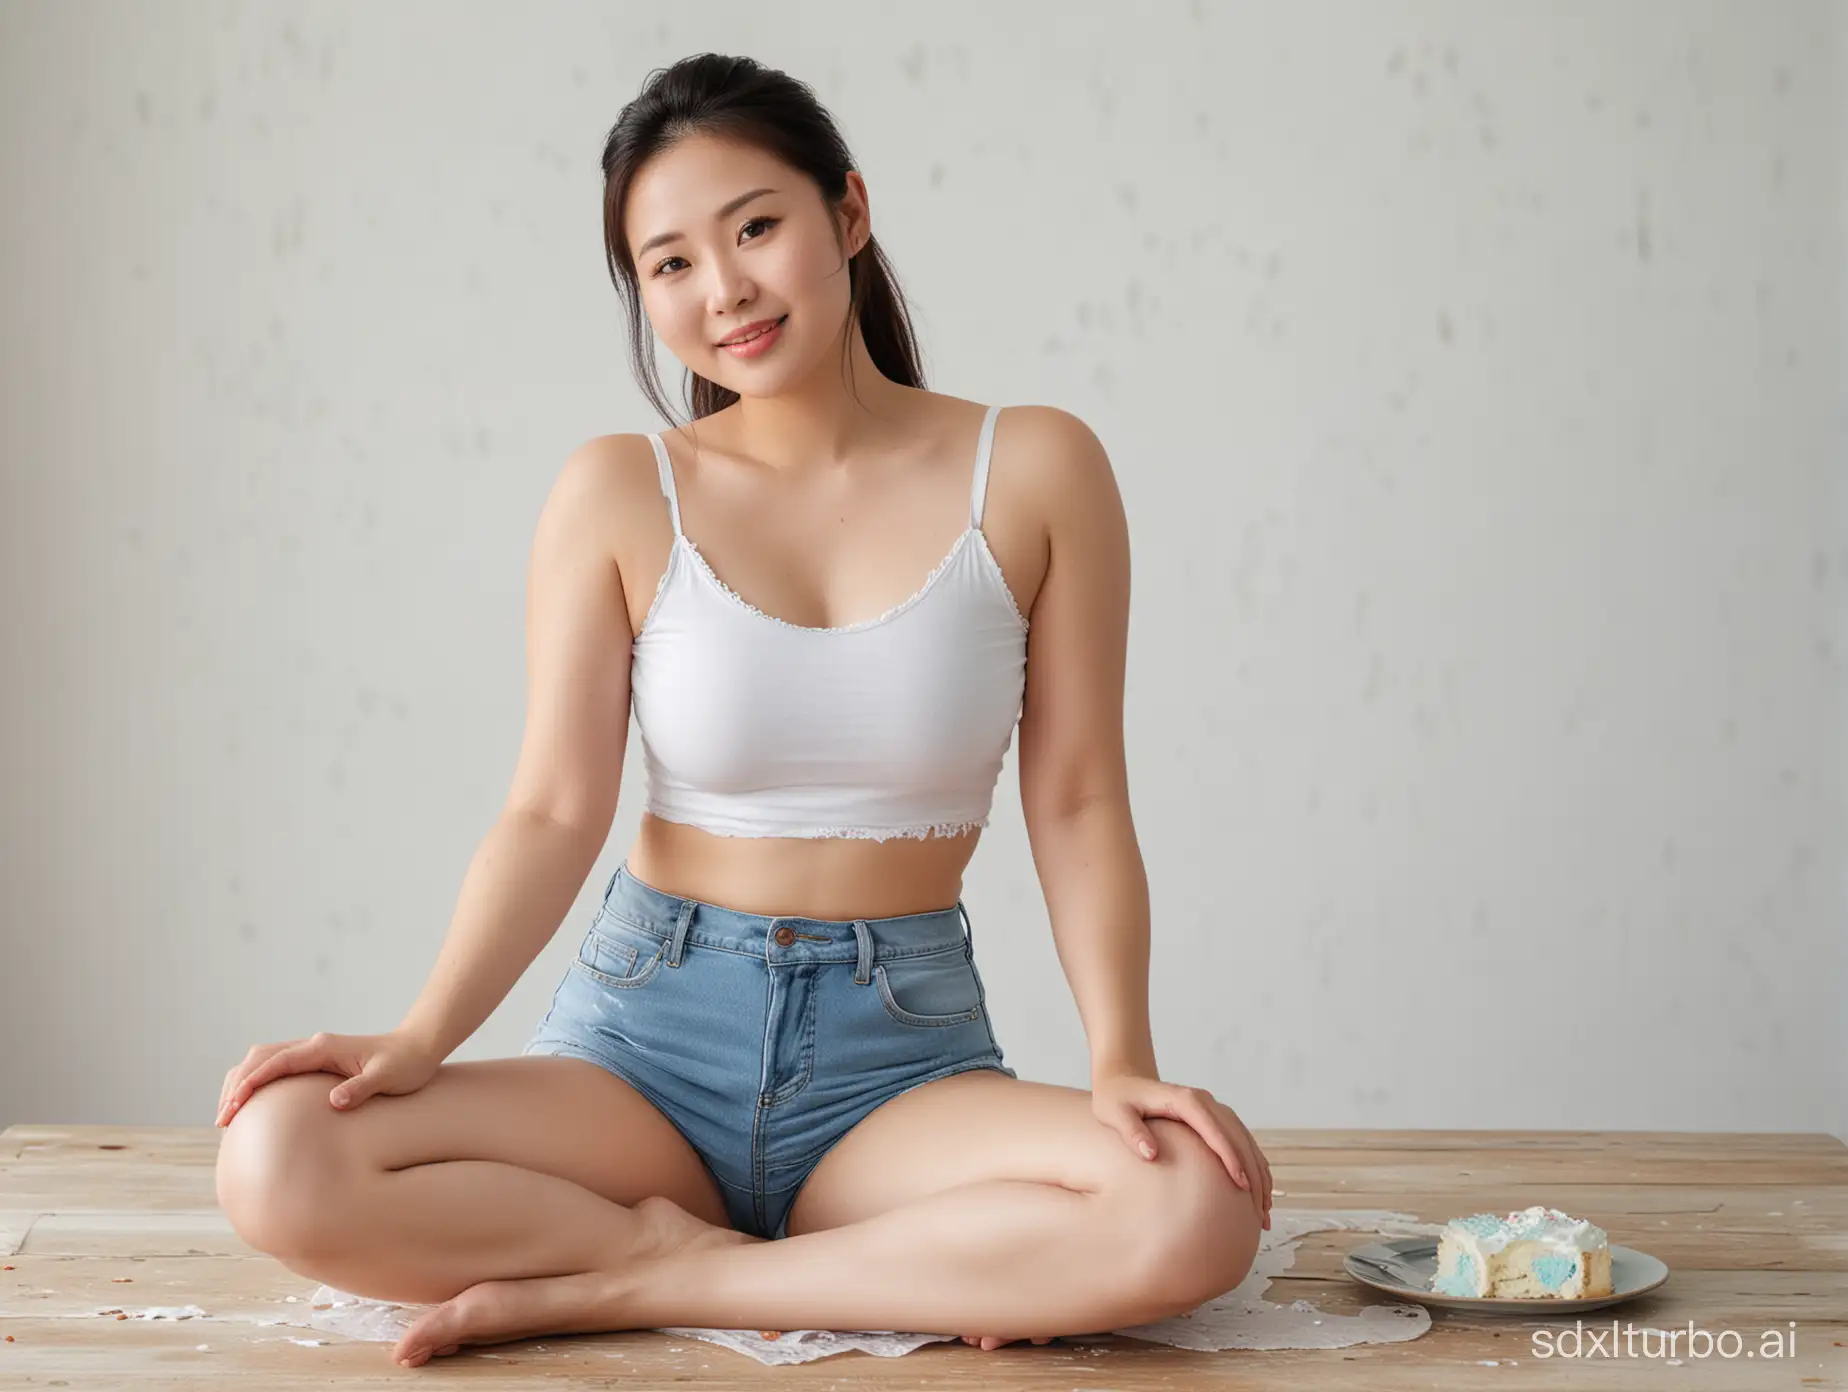 A beautiful Chinese woman, 32 years old, with a plump figure and fair skin, wearing light blue denim shorts, a white tank top, white slender thighs, barefoot, lying on a dining table with white cream cake smeared on her ankles.